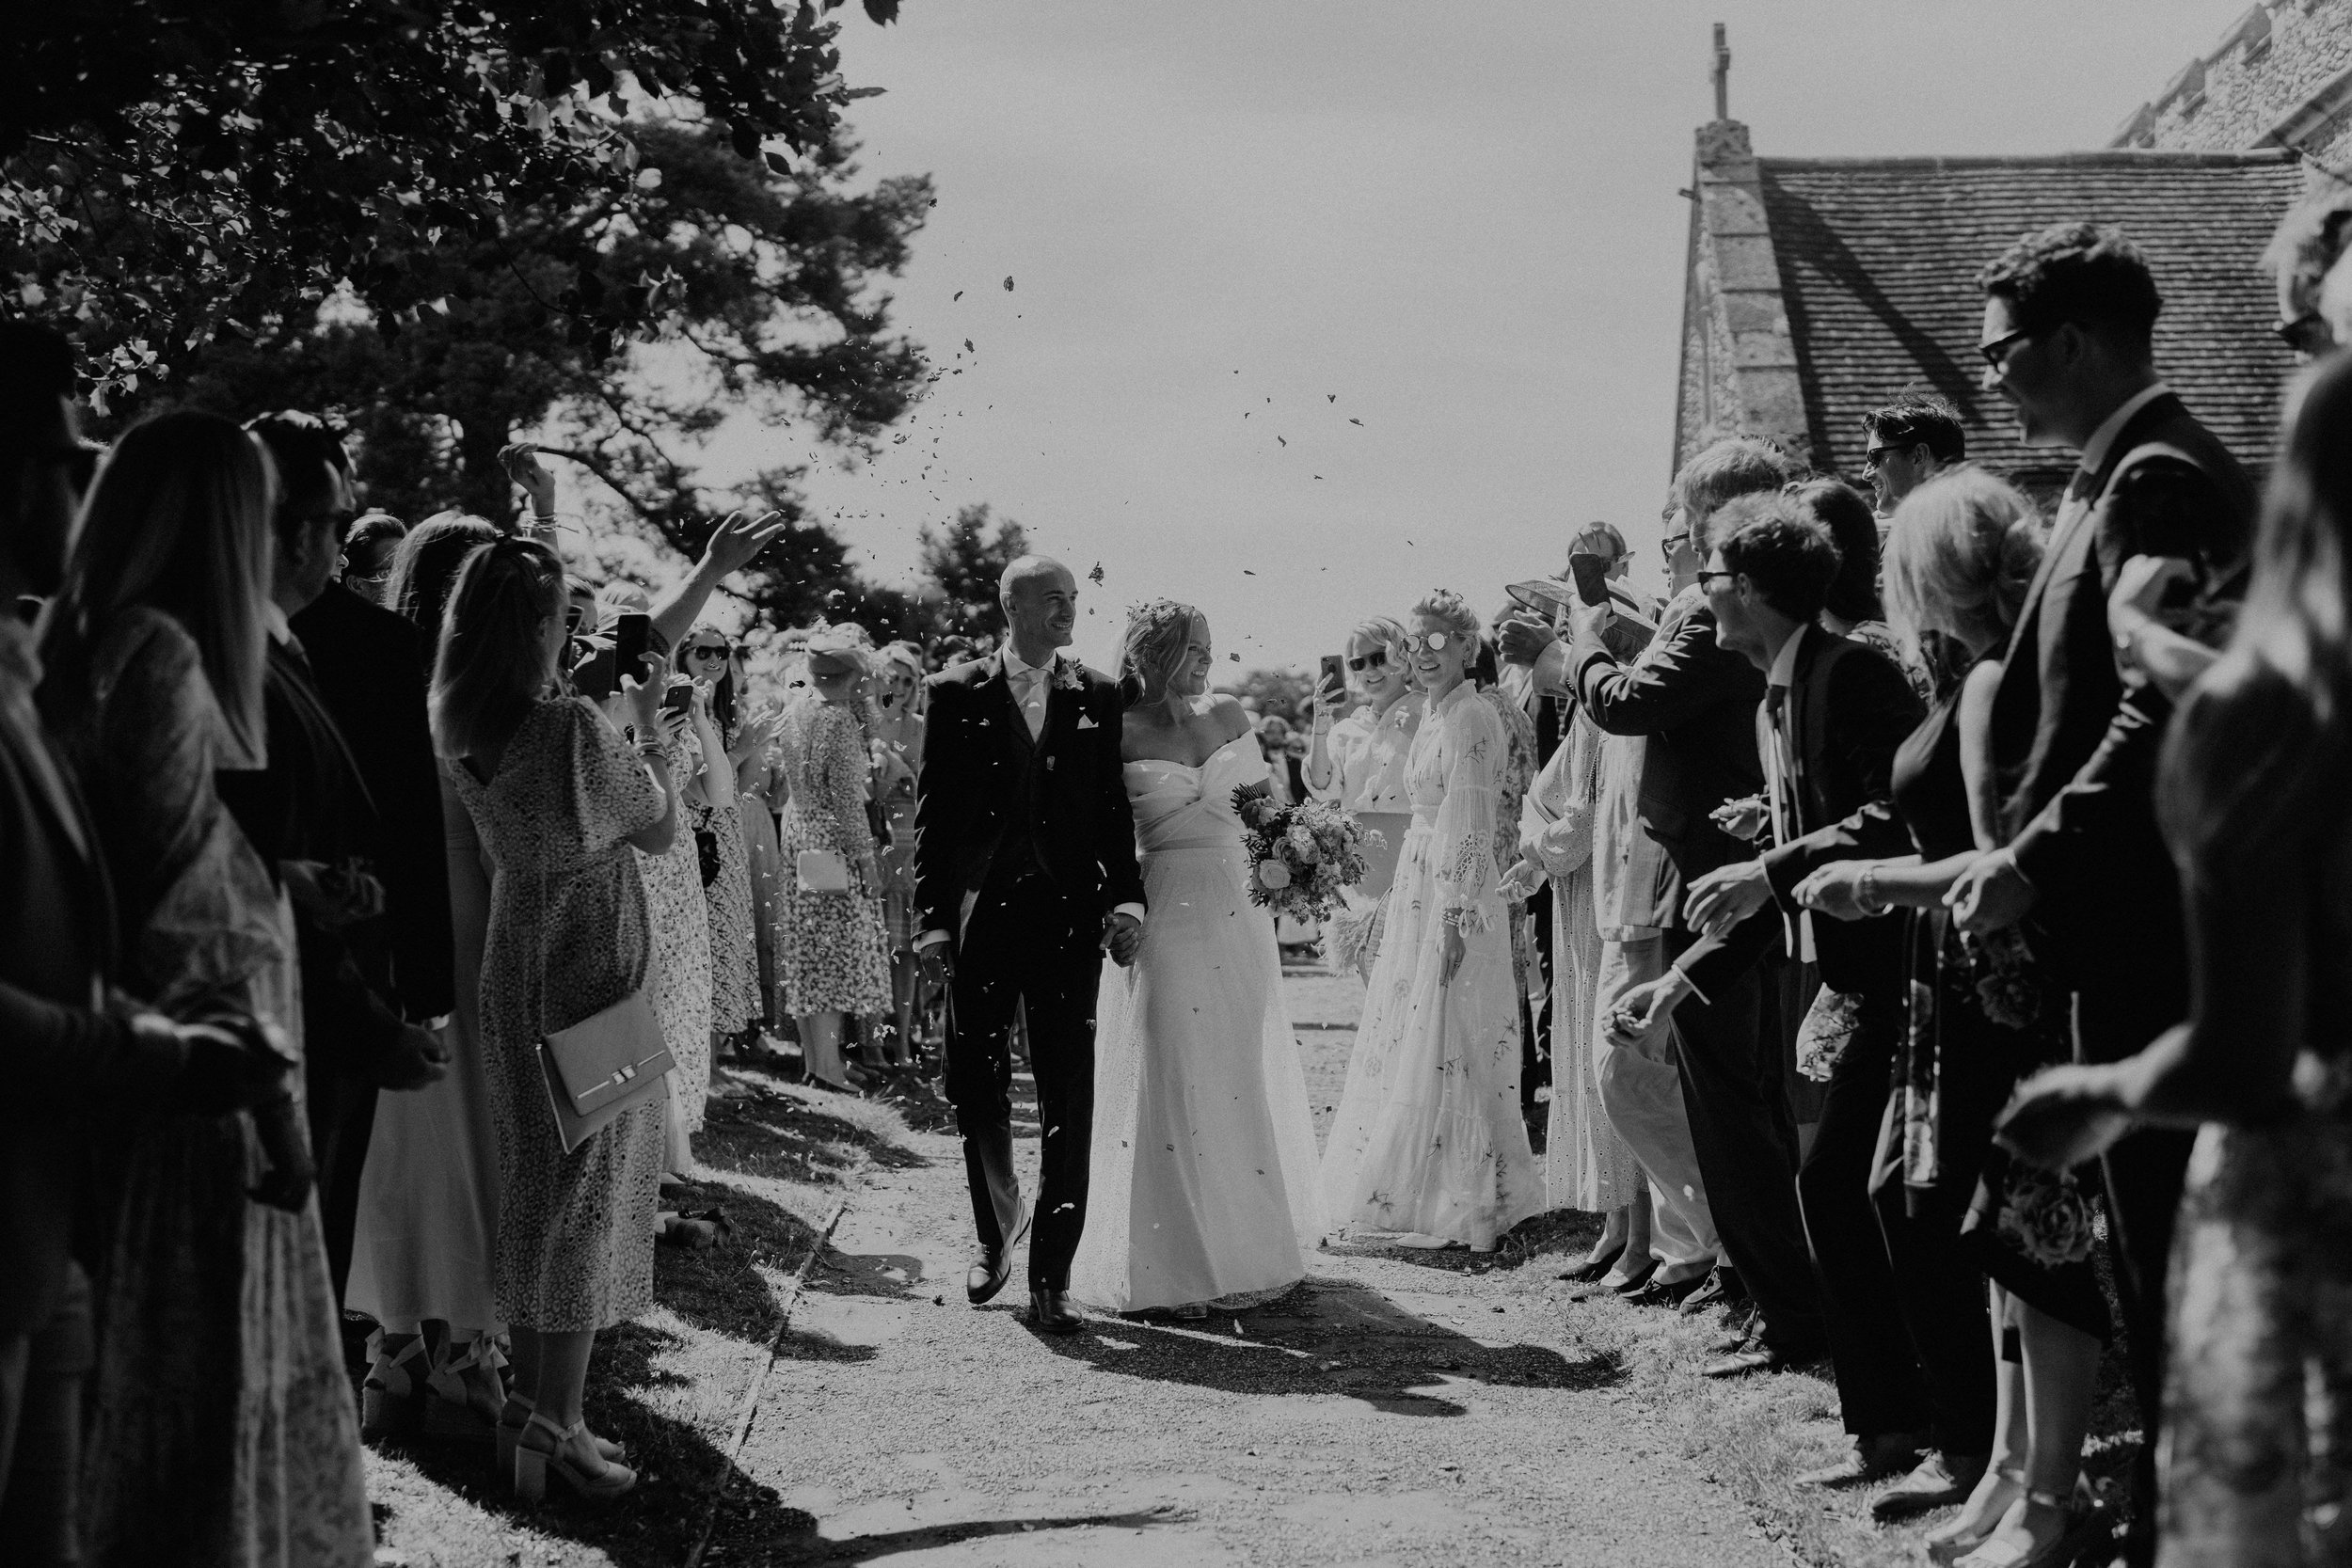 Beautiful bride Alice wears the Daffodil dress and Scotty skirt by Halfpenny London